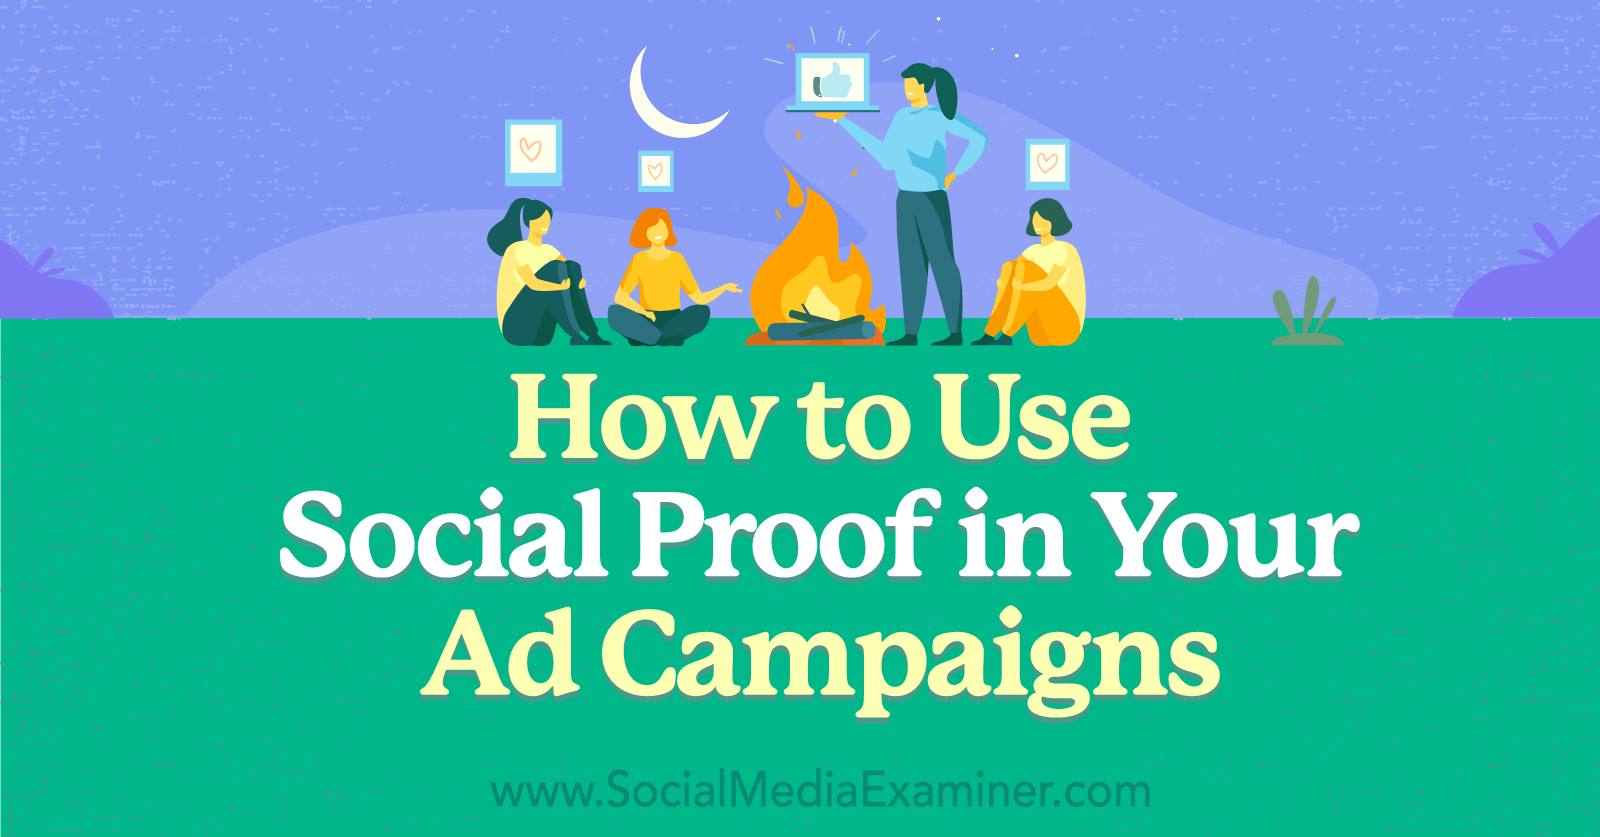 How to Use Social Proof in Your Ad Campaigns-Social Media Examiner